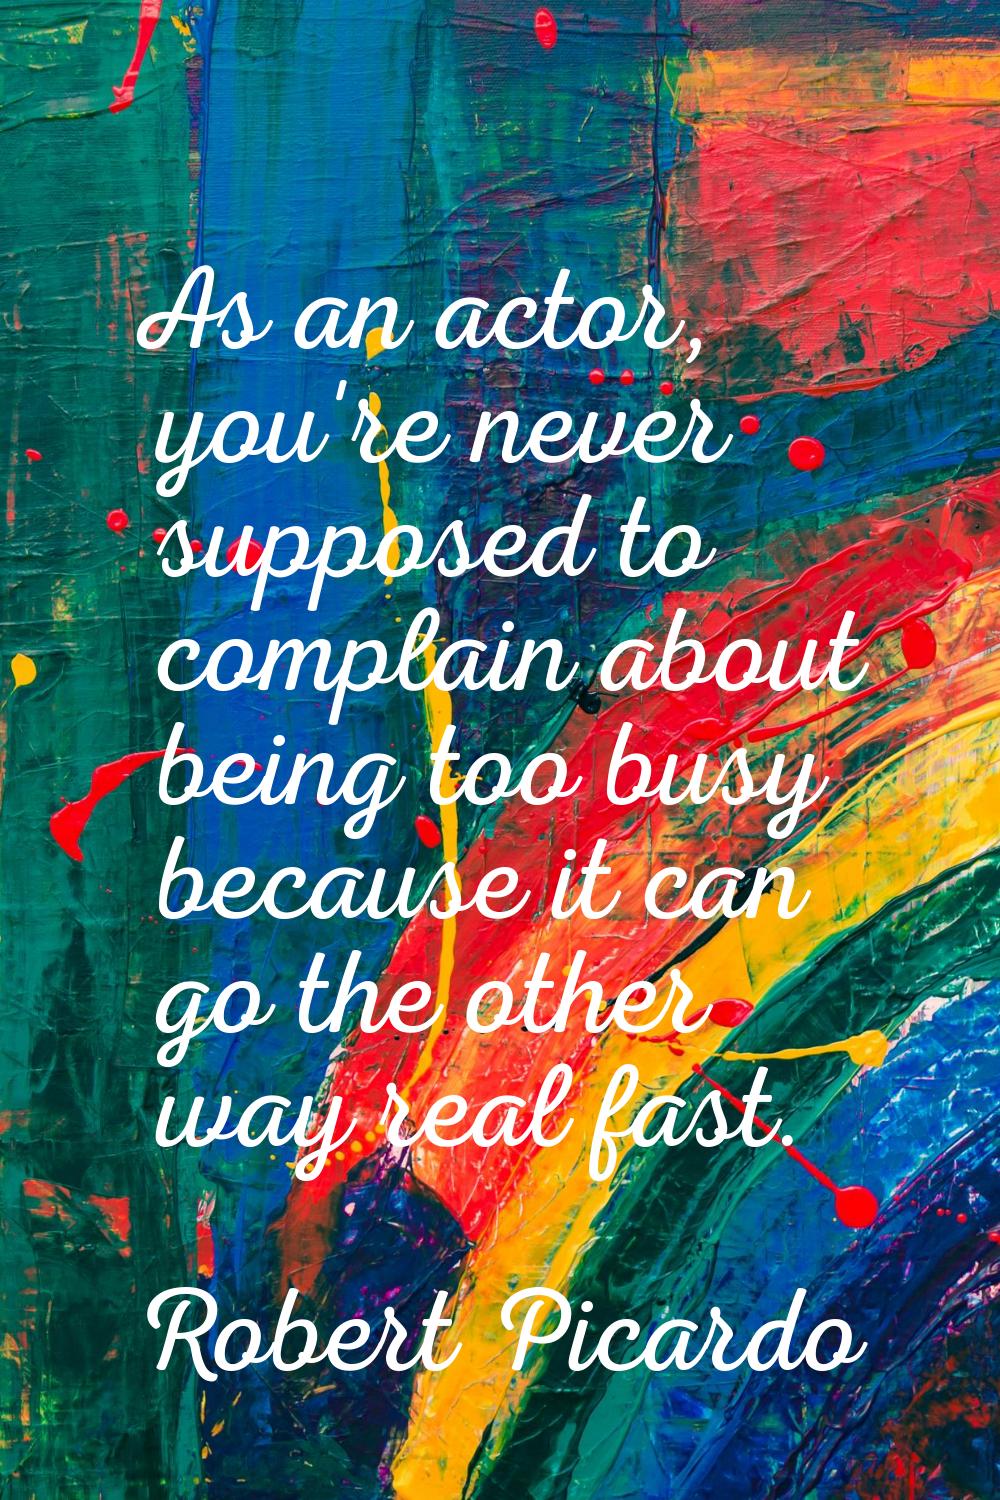 As an actor, you're never supposed to complain about being too busy because it can go the other way